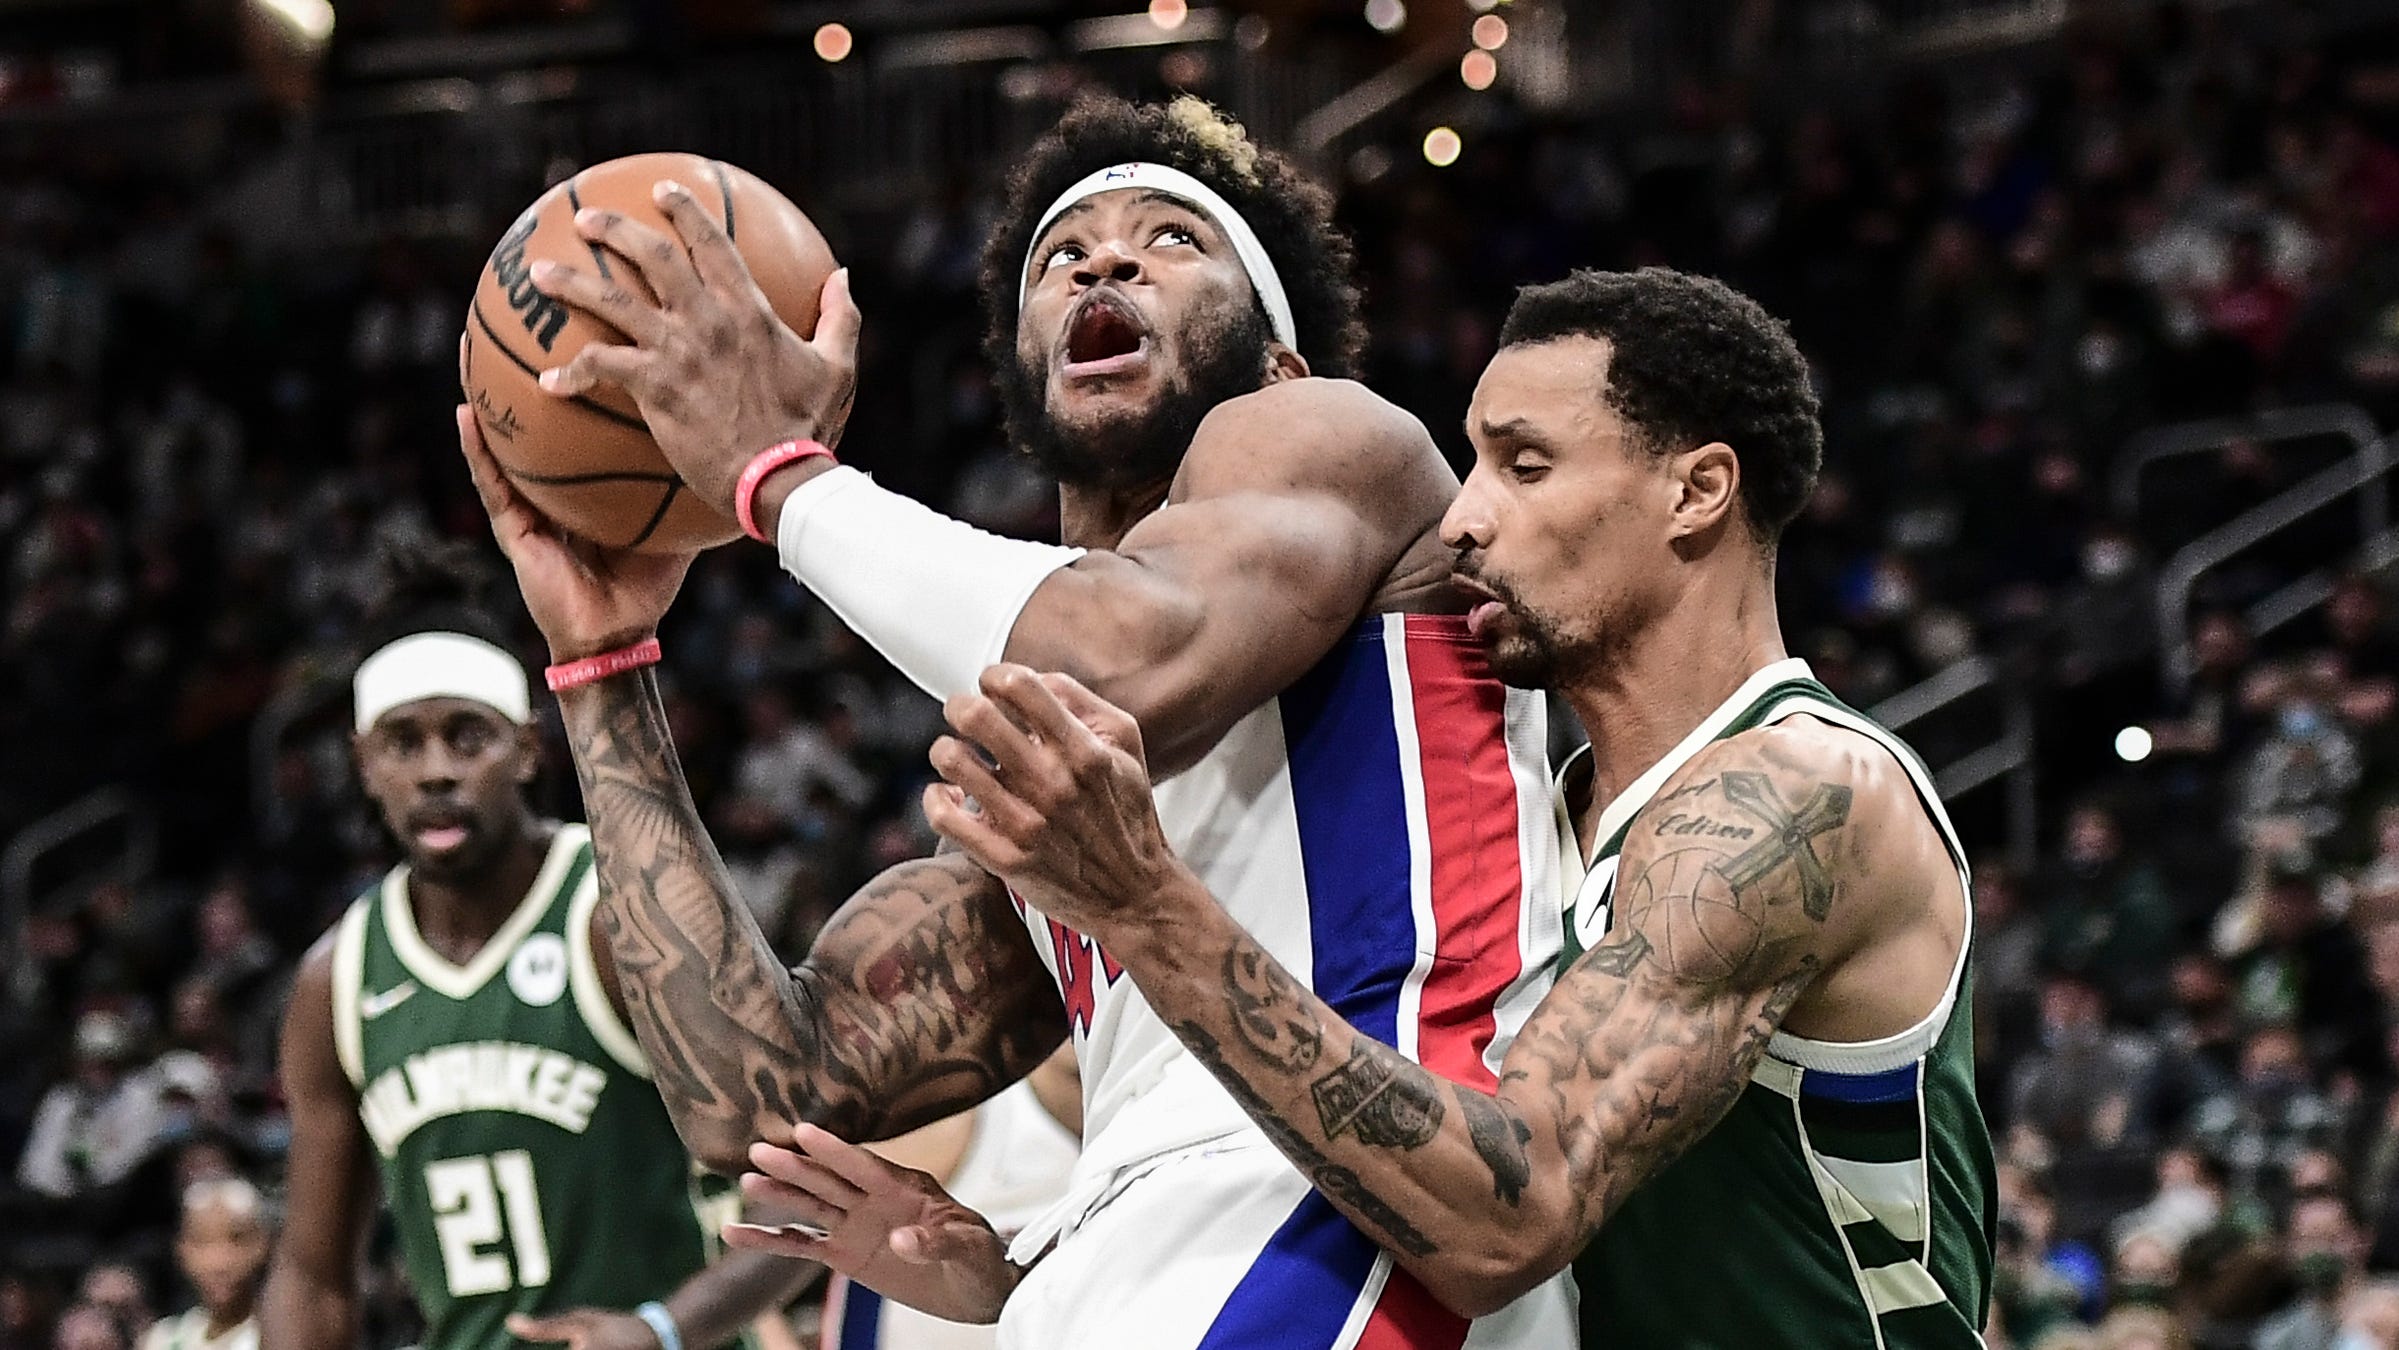 Pistons forward Saddiq Bey looks for a shot against Bucks guard George Hill in the fourth quarter of the Pistons' 115-106 win on Monday, Jan. 3, 2022, in Milwaukee.